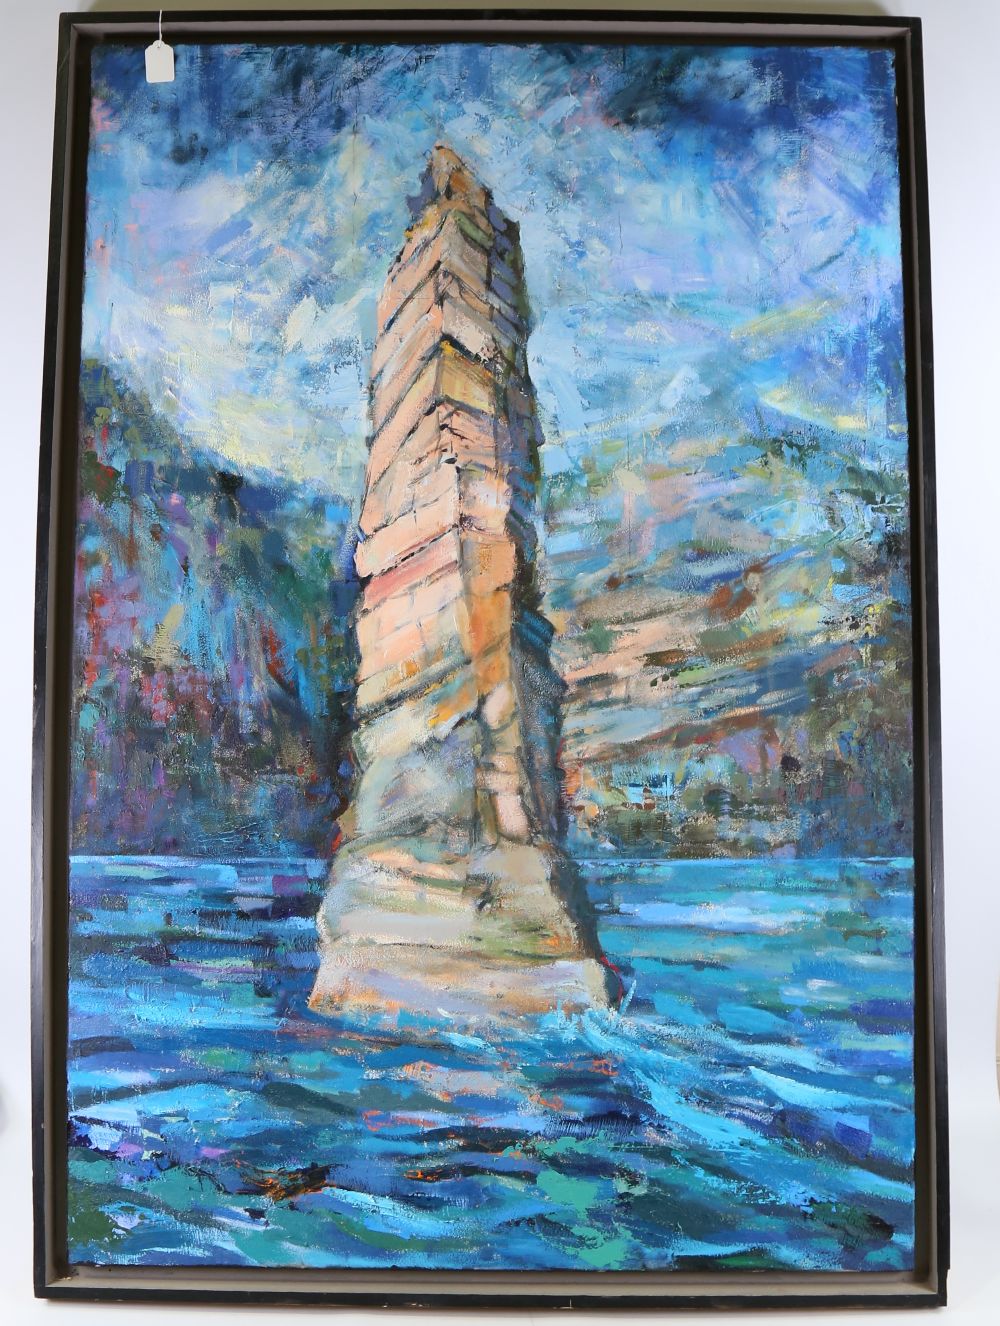 Roger Blaker (1944 - 2015), oil on canvas, Sea Stack, 53" x 36", framed Very good condition